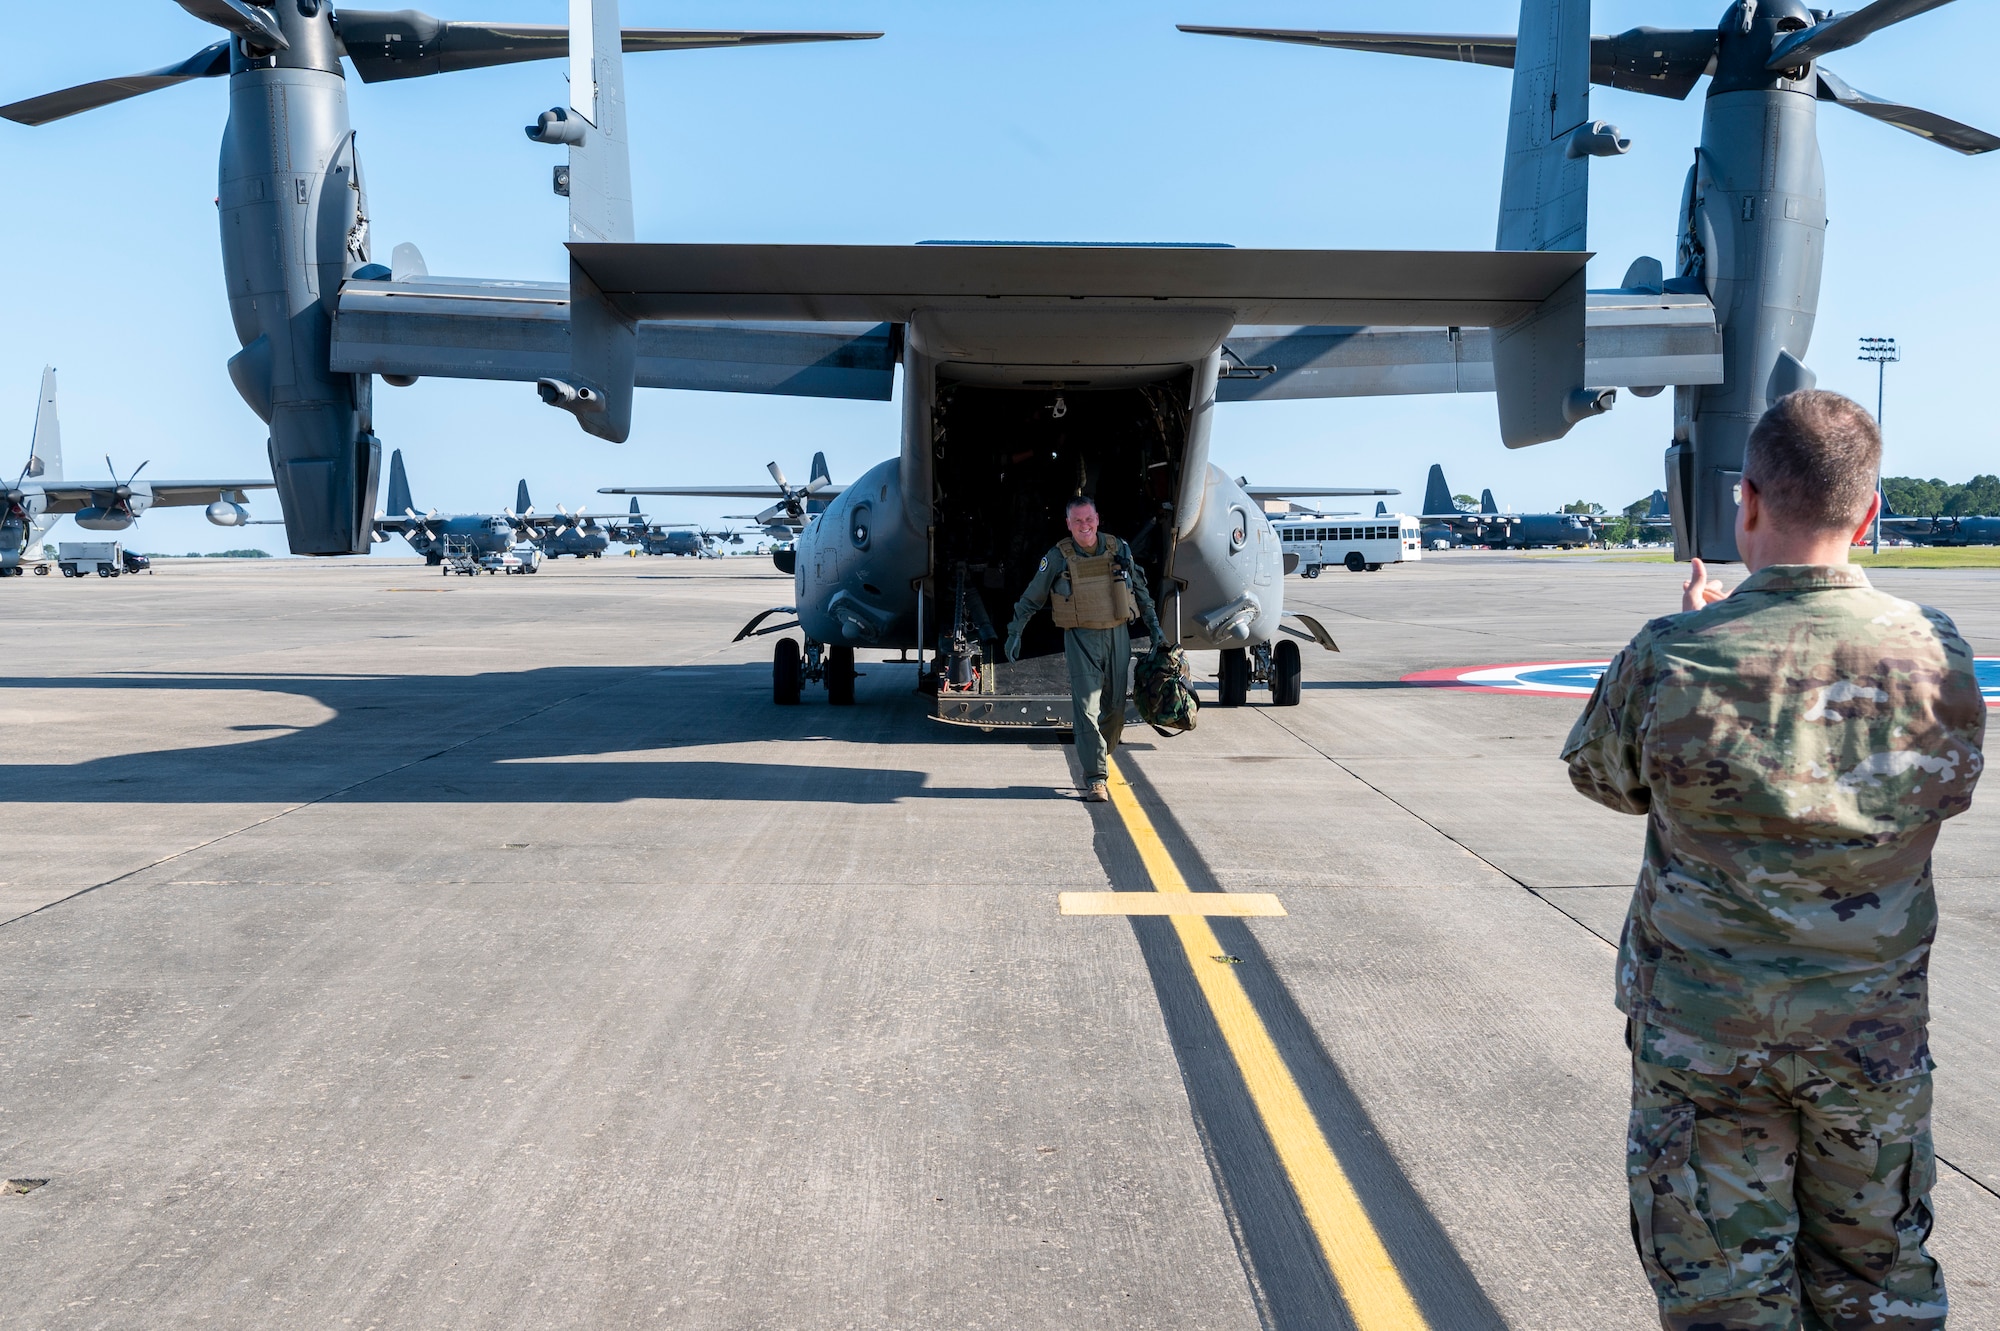 U.S. Air Force Lt. Gen. Brad Webb, commander of Air Education and Training Command, is greeted by Lt. Gen. Jim Slife, commander of Air Force Special Operations Command, after exiting a CV-22 Osprey following his fini-flight May 10, 2022 at Hurlburt Field, Fla.